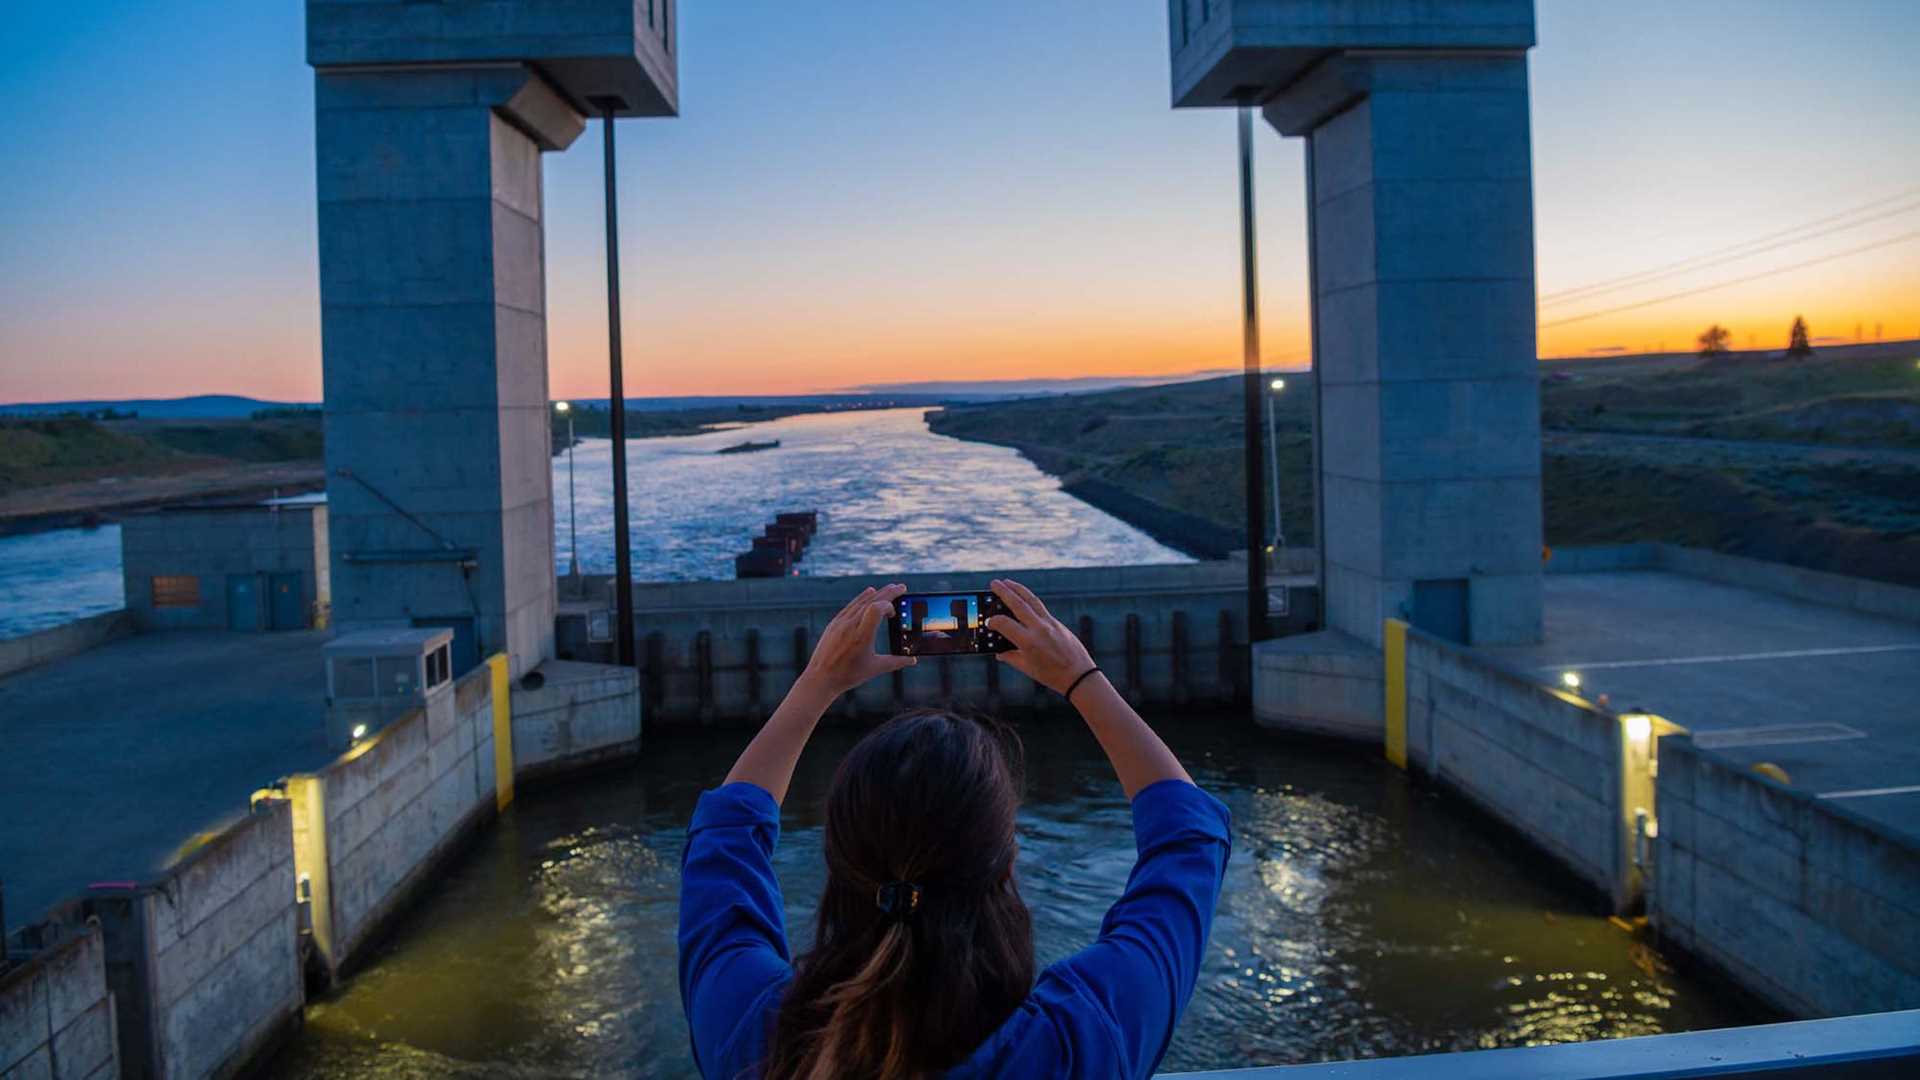 A guest snaps a photo while transiting the locks on the Columbia River